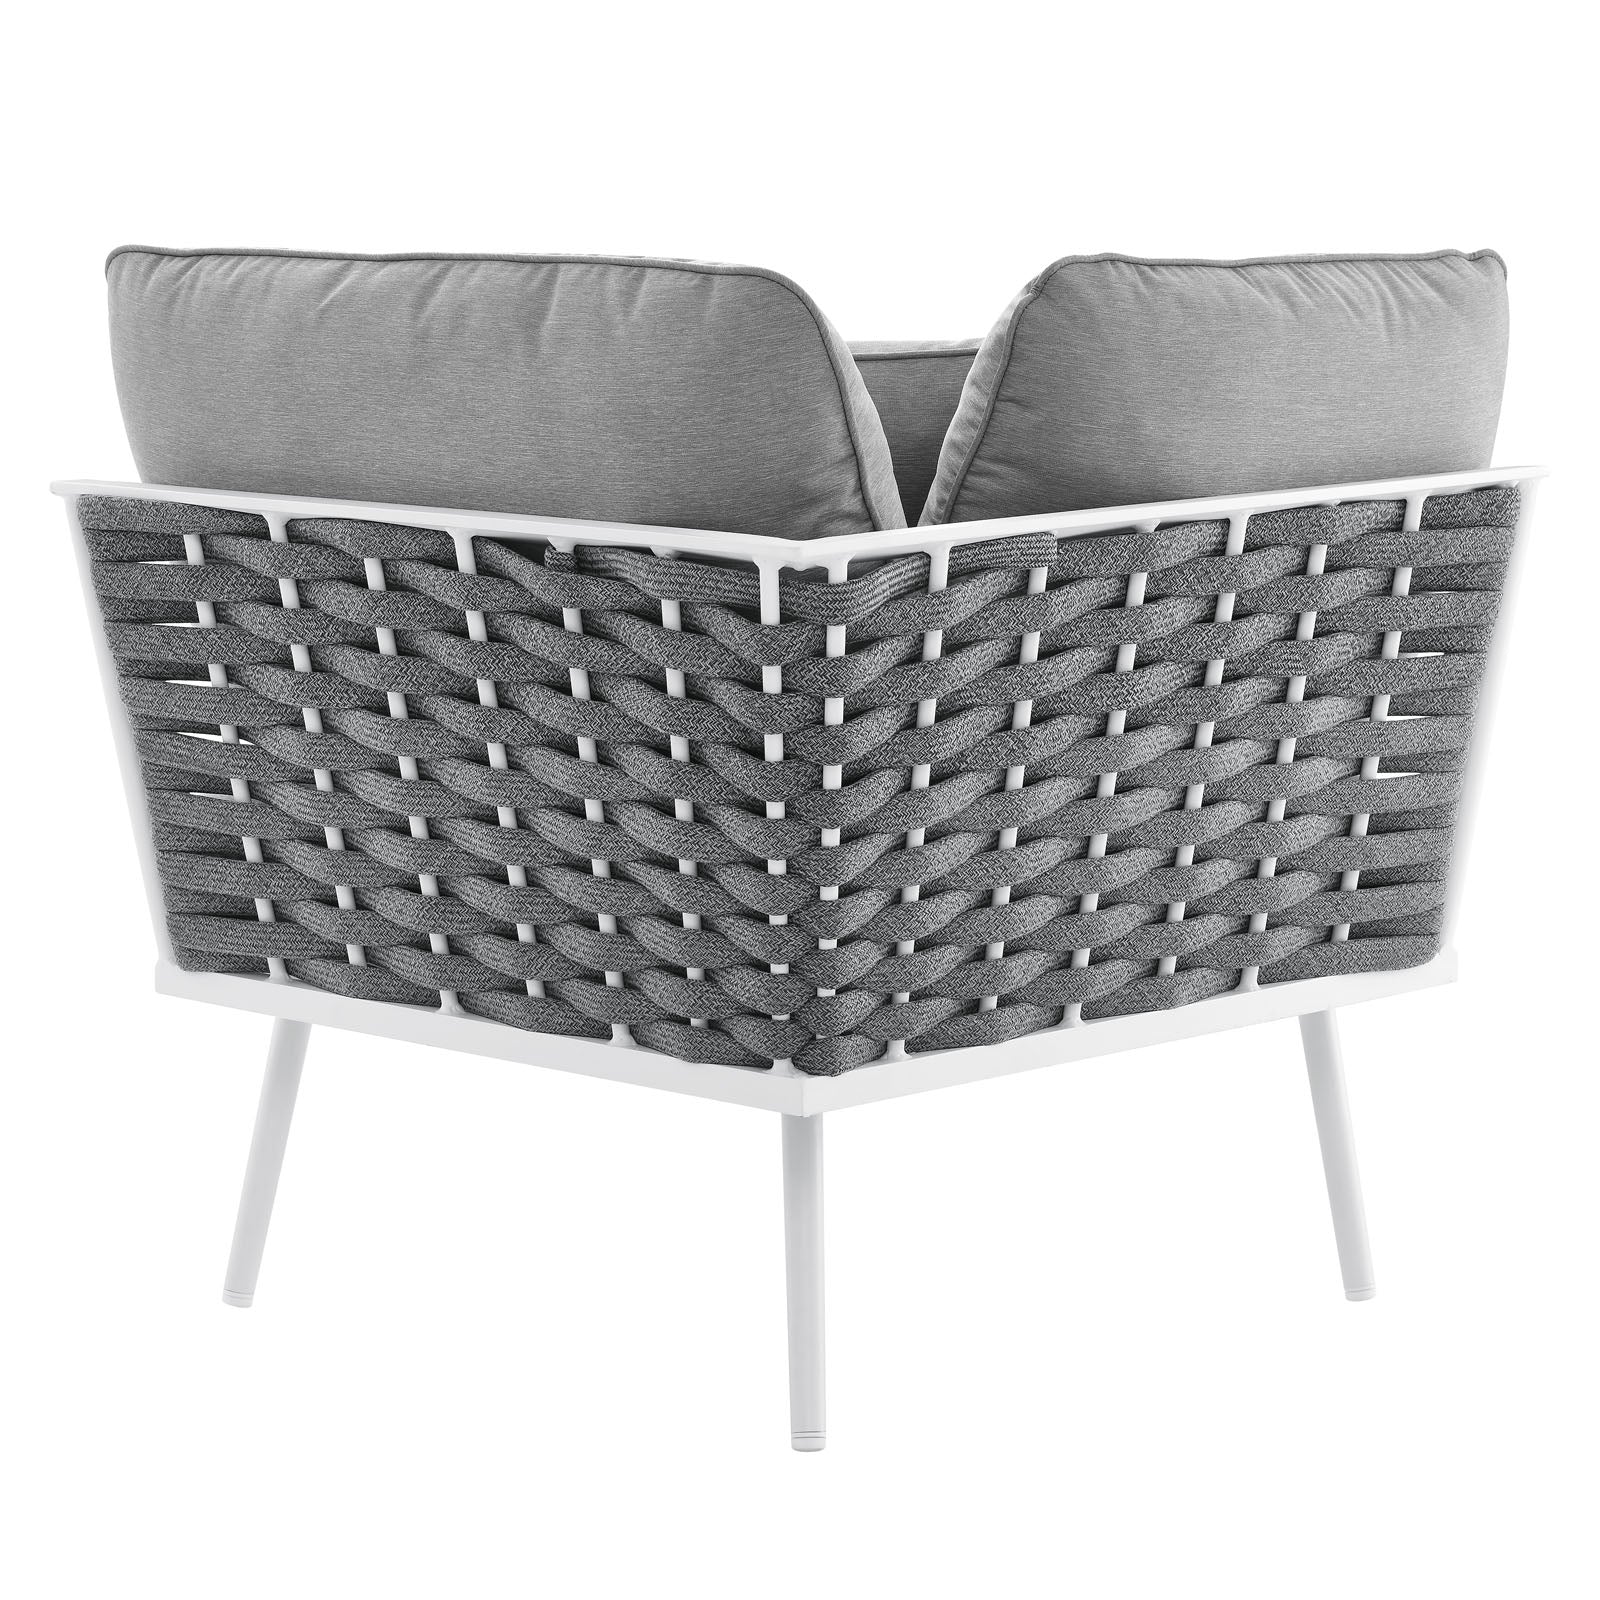 Stance Outdoor Patio Aluminum Corner Chair - East Shore Modern Home Furnishings